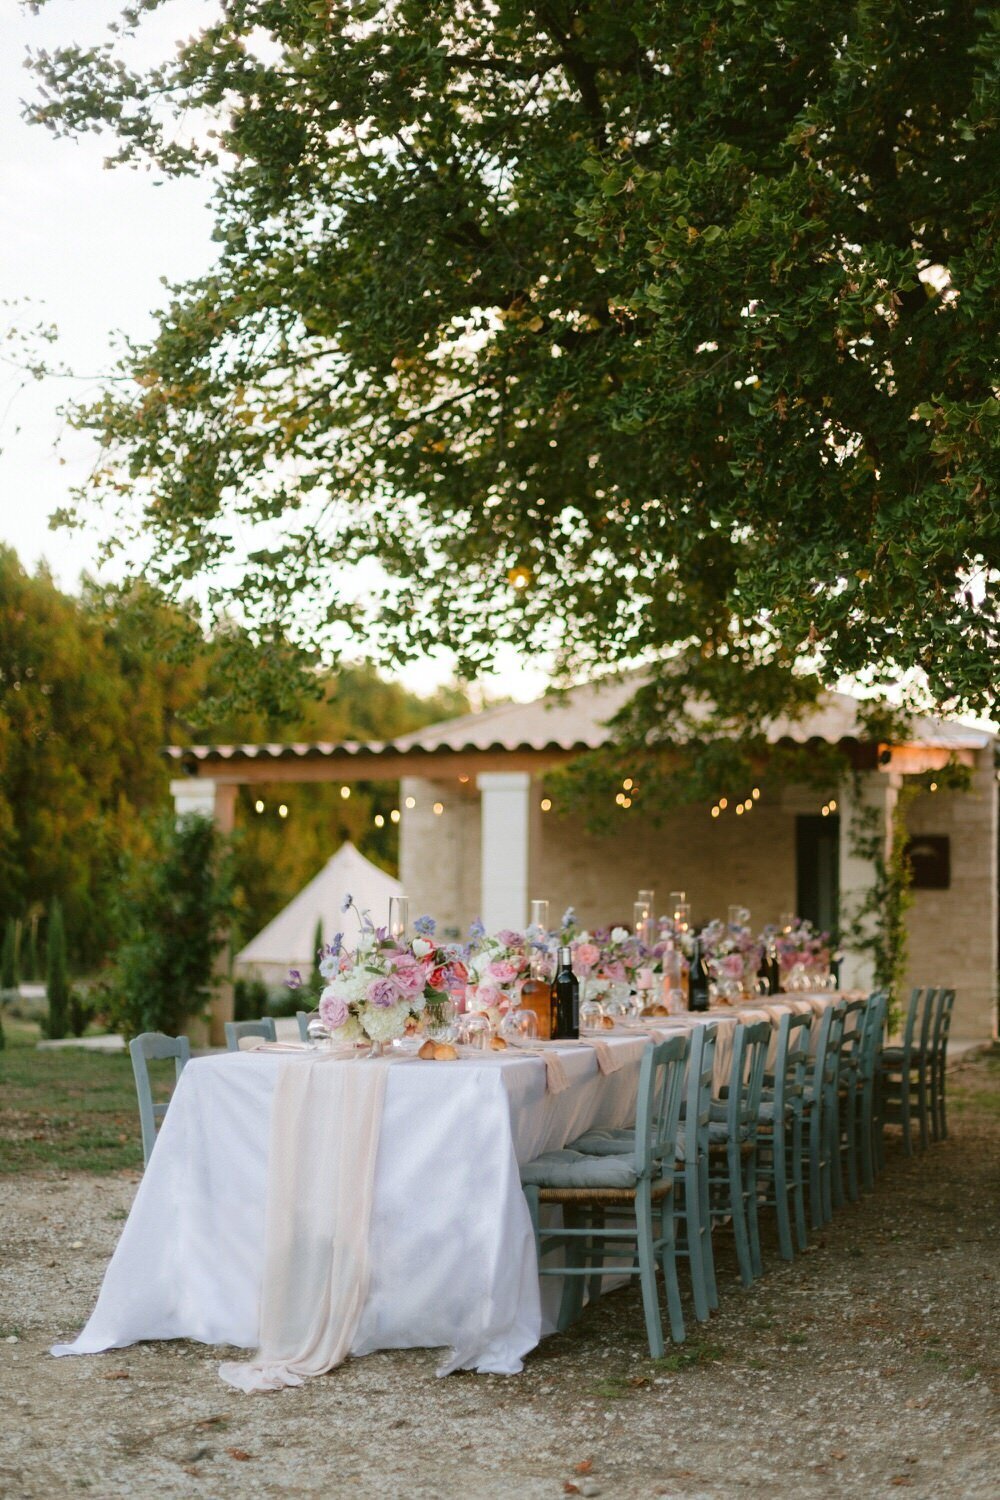 31_Ana + Matt _ Claire Macintyre-268 Kopie_Discover a refined and elegant wedding in France created by Provence Luxury Floral and Event Designer Grace and Flowers-1